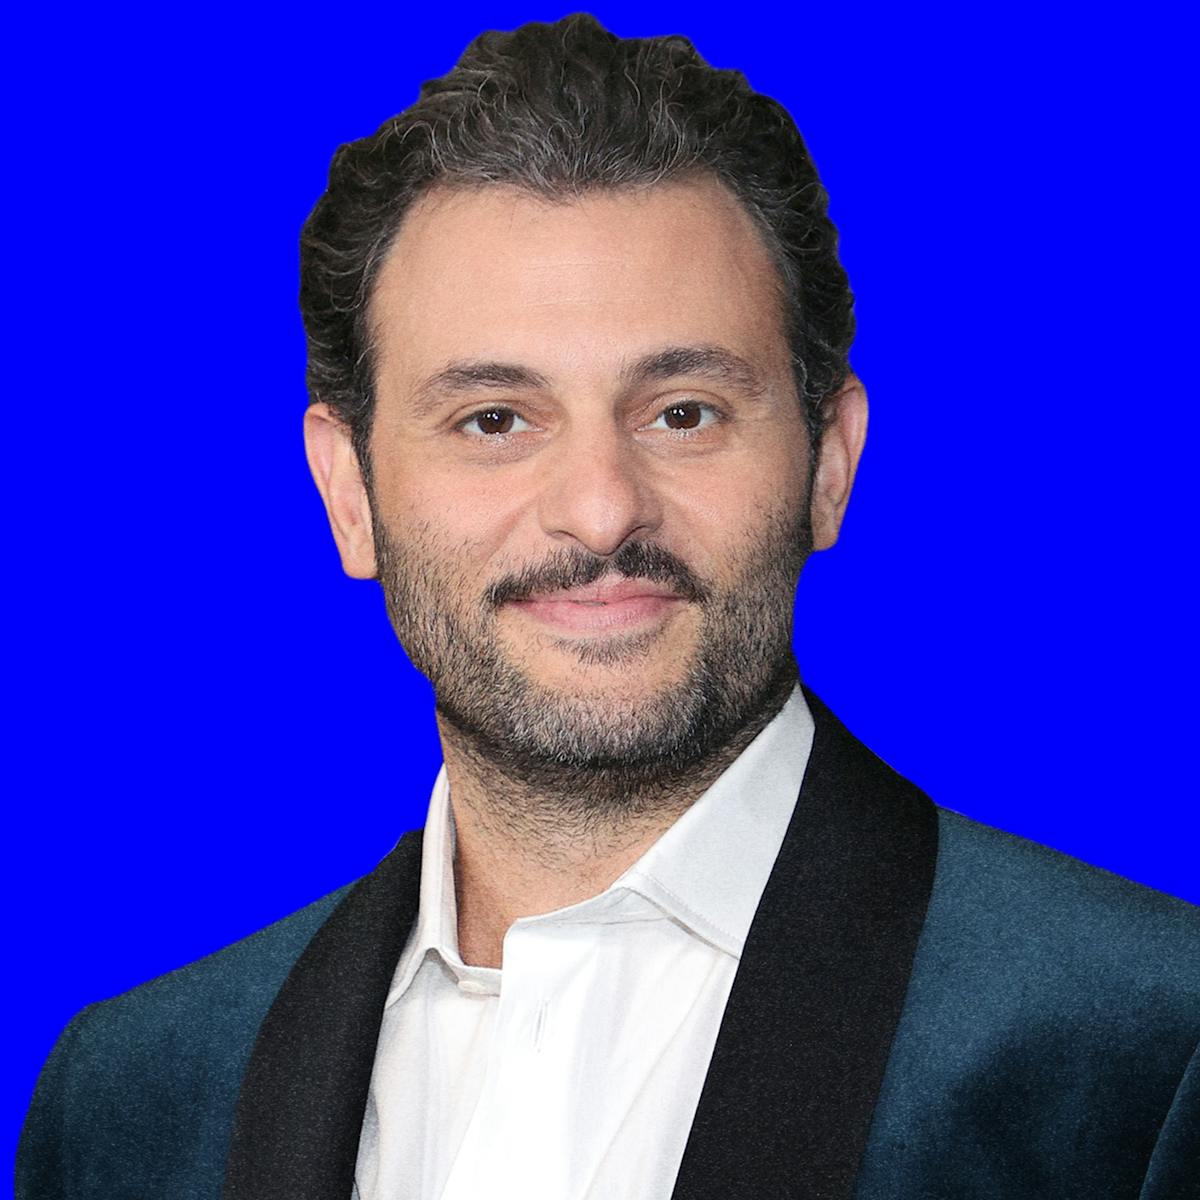 Arian Moayed wears a velvet jacket and a white buttoned down shirt. He has a short mustache and smiles at the camera. Behind him is a blue background with his name in capital letters repeated.